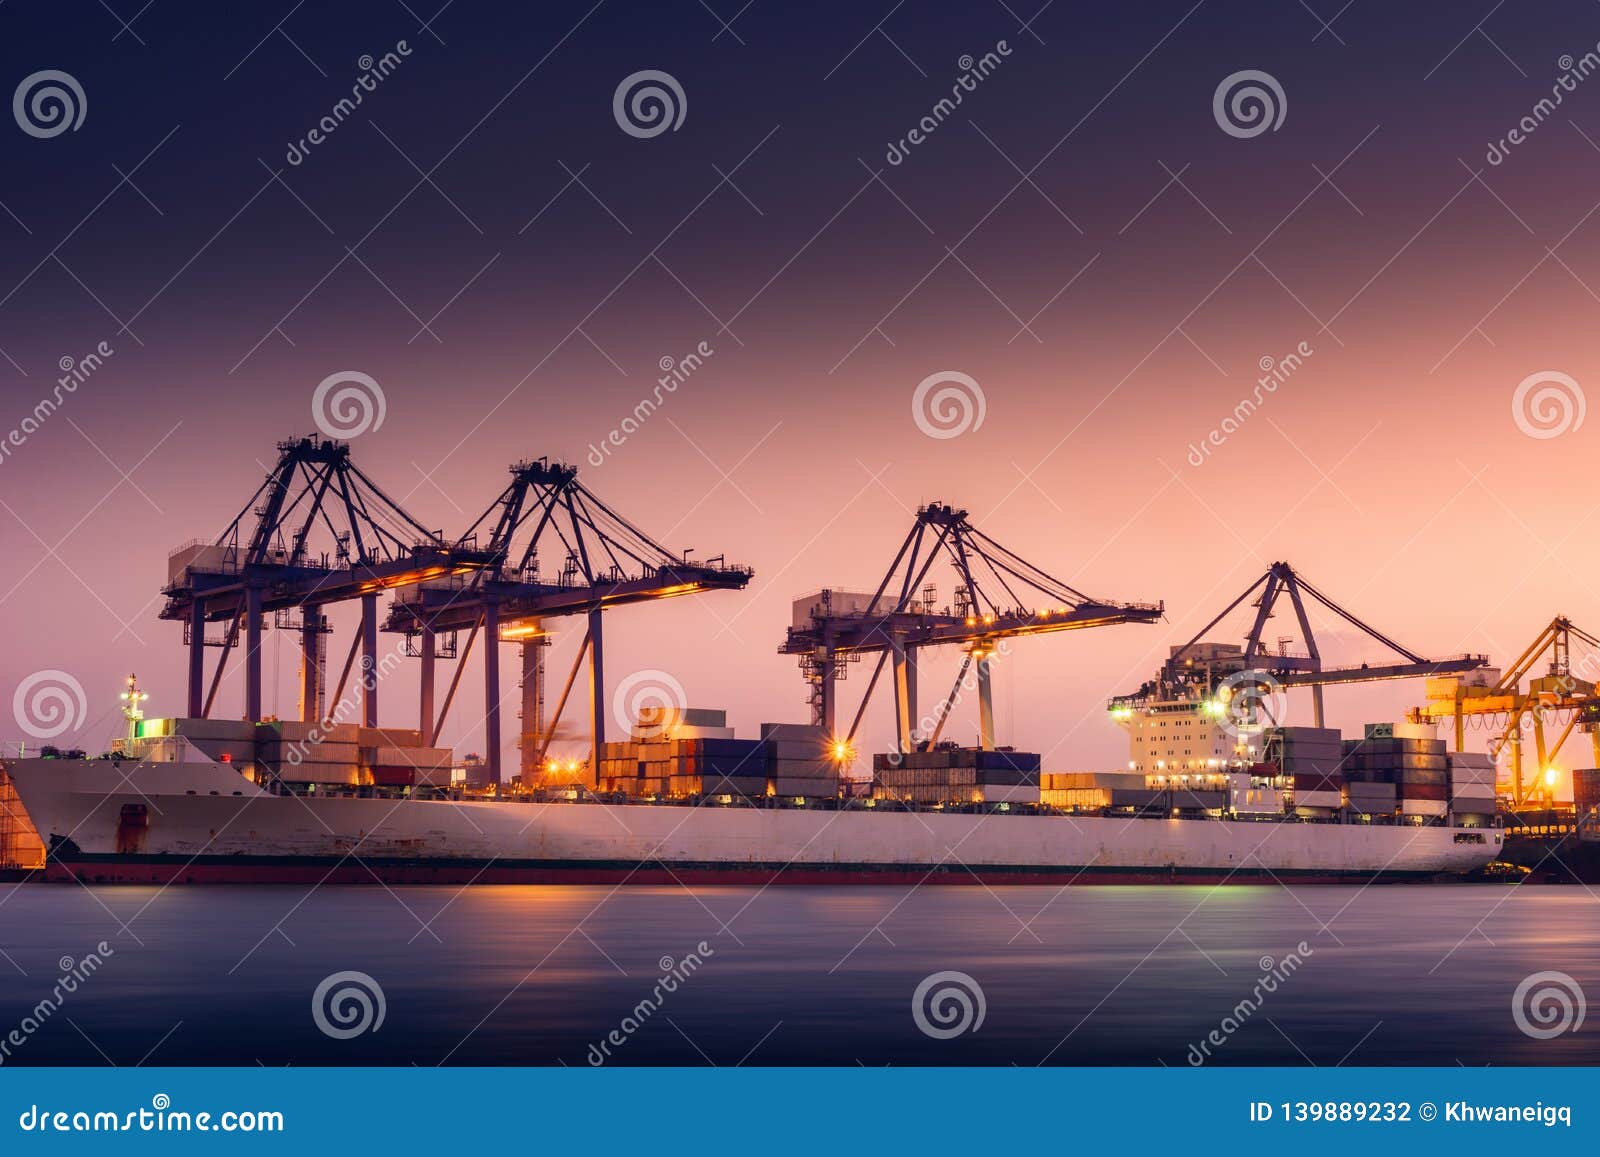 transportation and shipping logistics loading dock terminal., container import and export of sea freight transport industrial.,